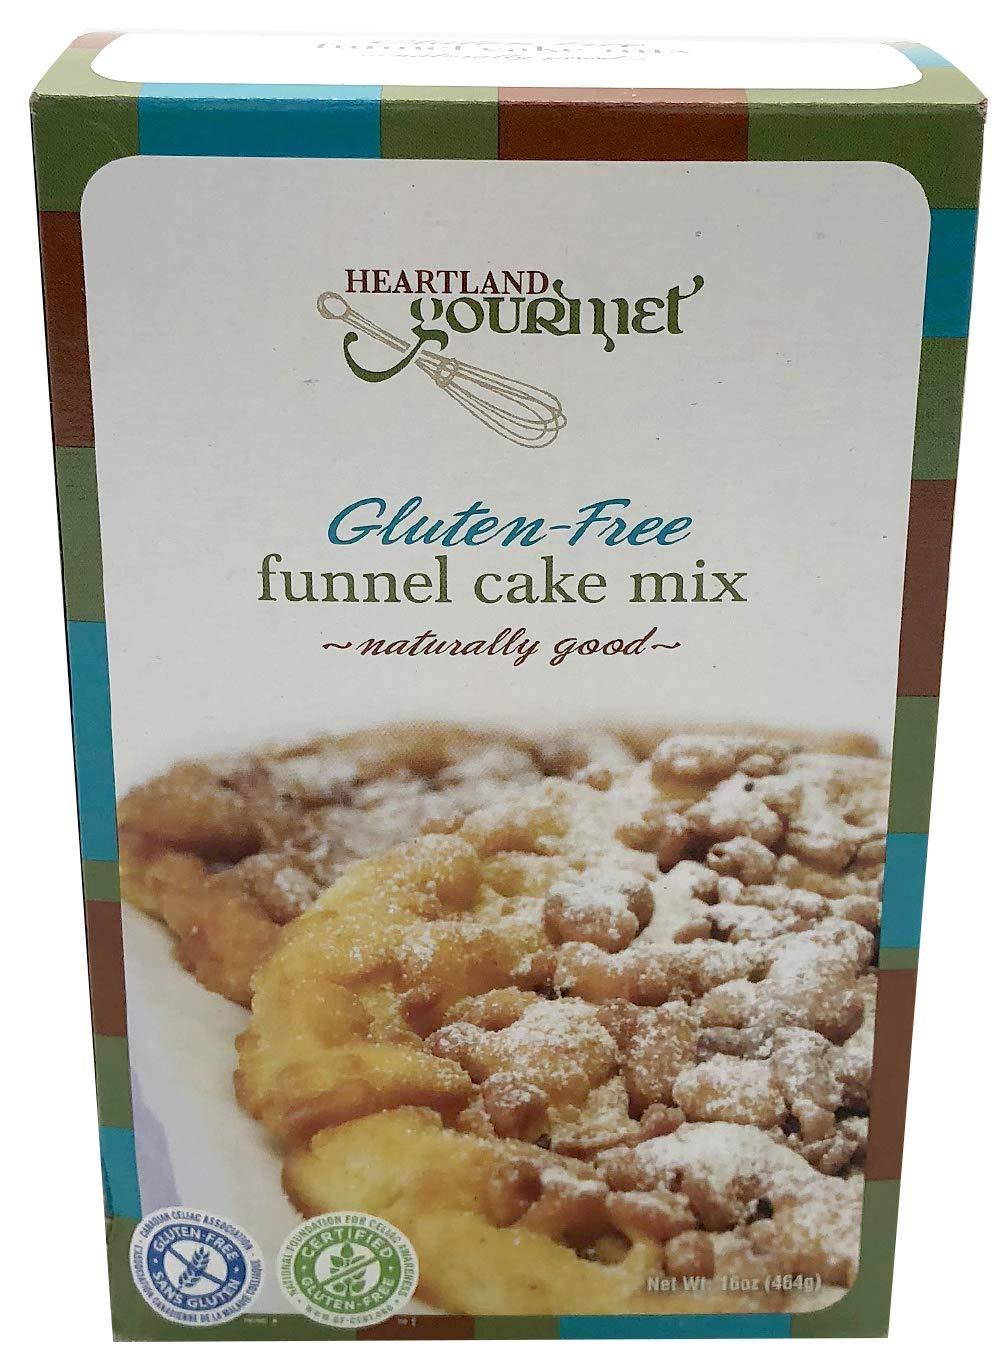 Heartland GOURMET: Gluten Free Funnel Cake Mix - Crispy and Airy - Certified Gluten Free Ingredients - All Purpose - Safe for Celiac Diet